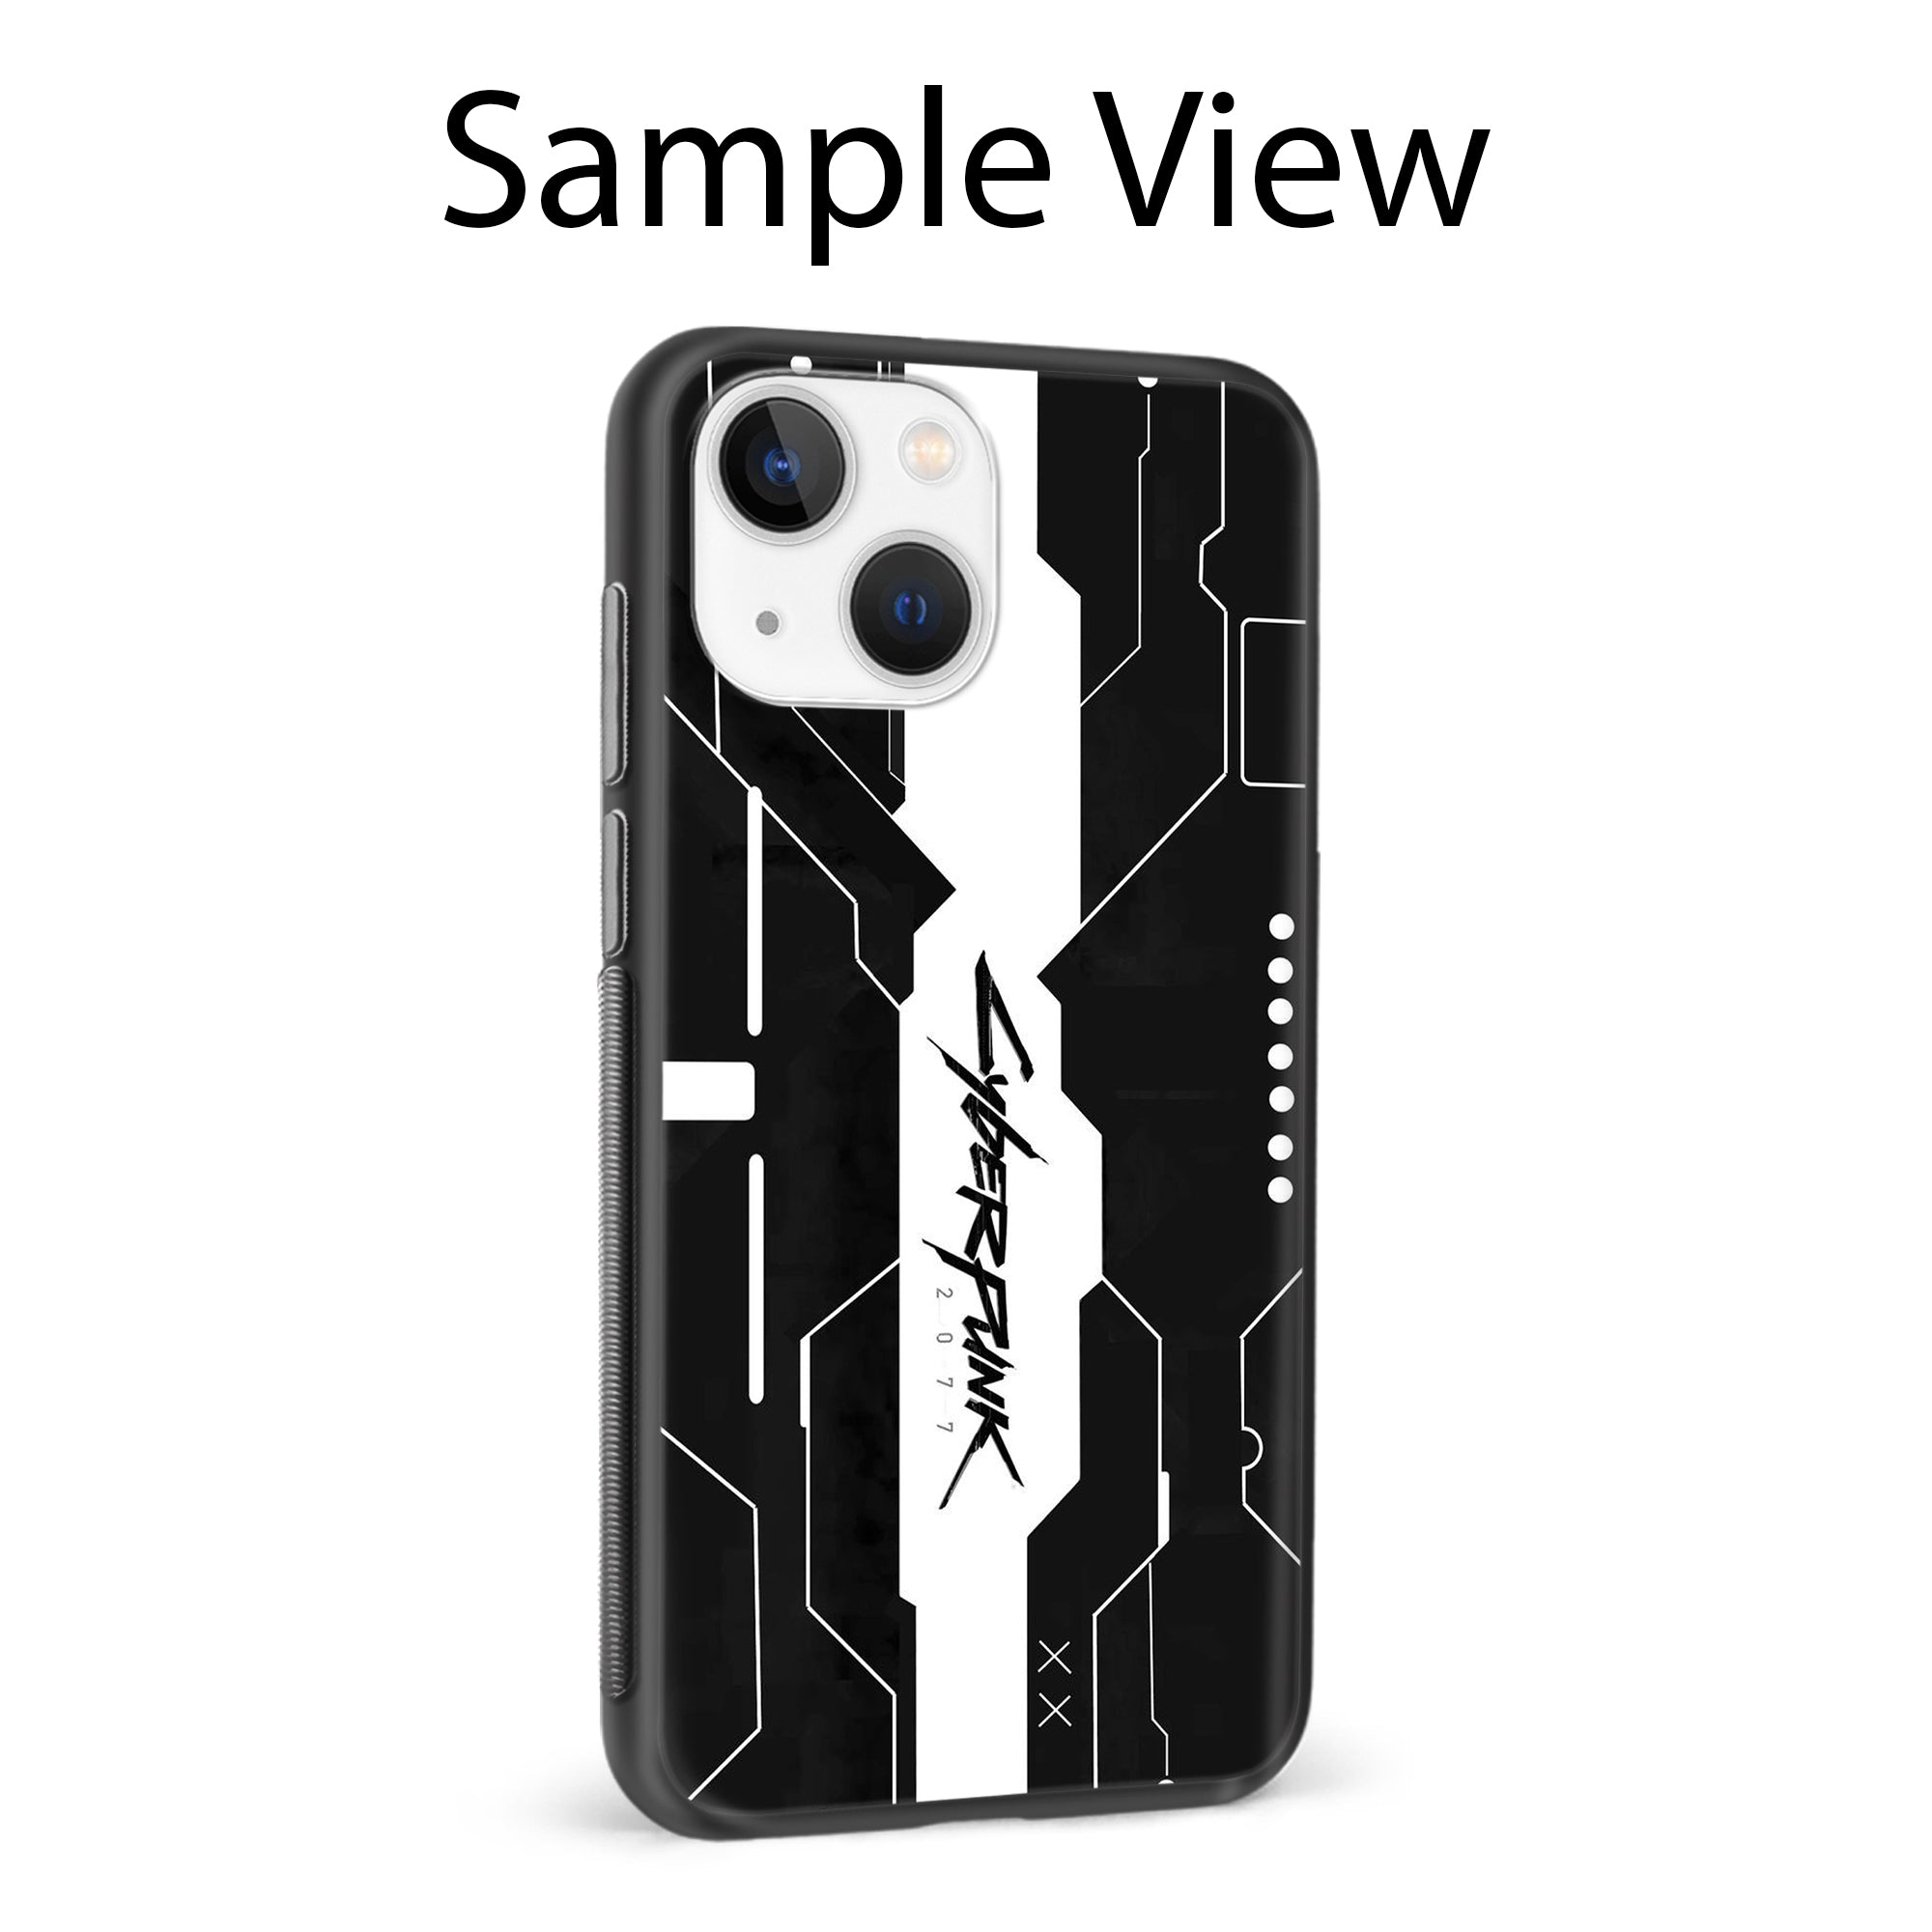 Buy Cyberpunk 2077 Art Glass/Metal Back Mobile Phone Case/Cover For Apple iPhone 12 pro Online